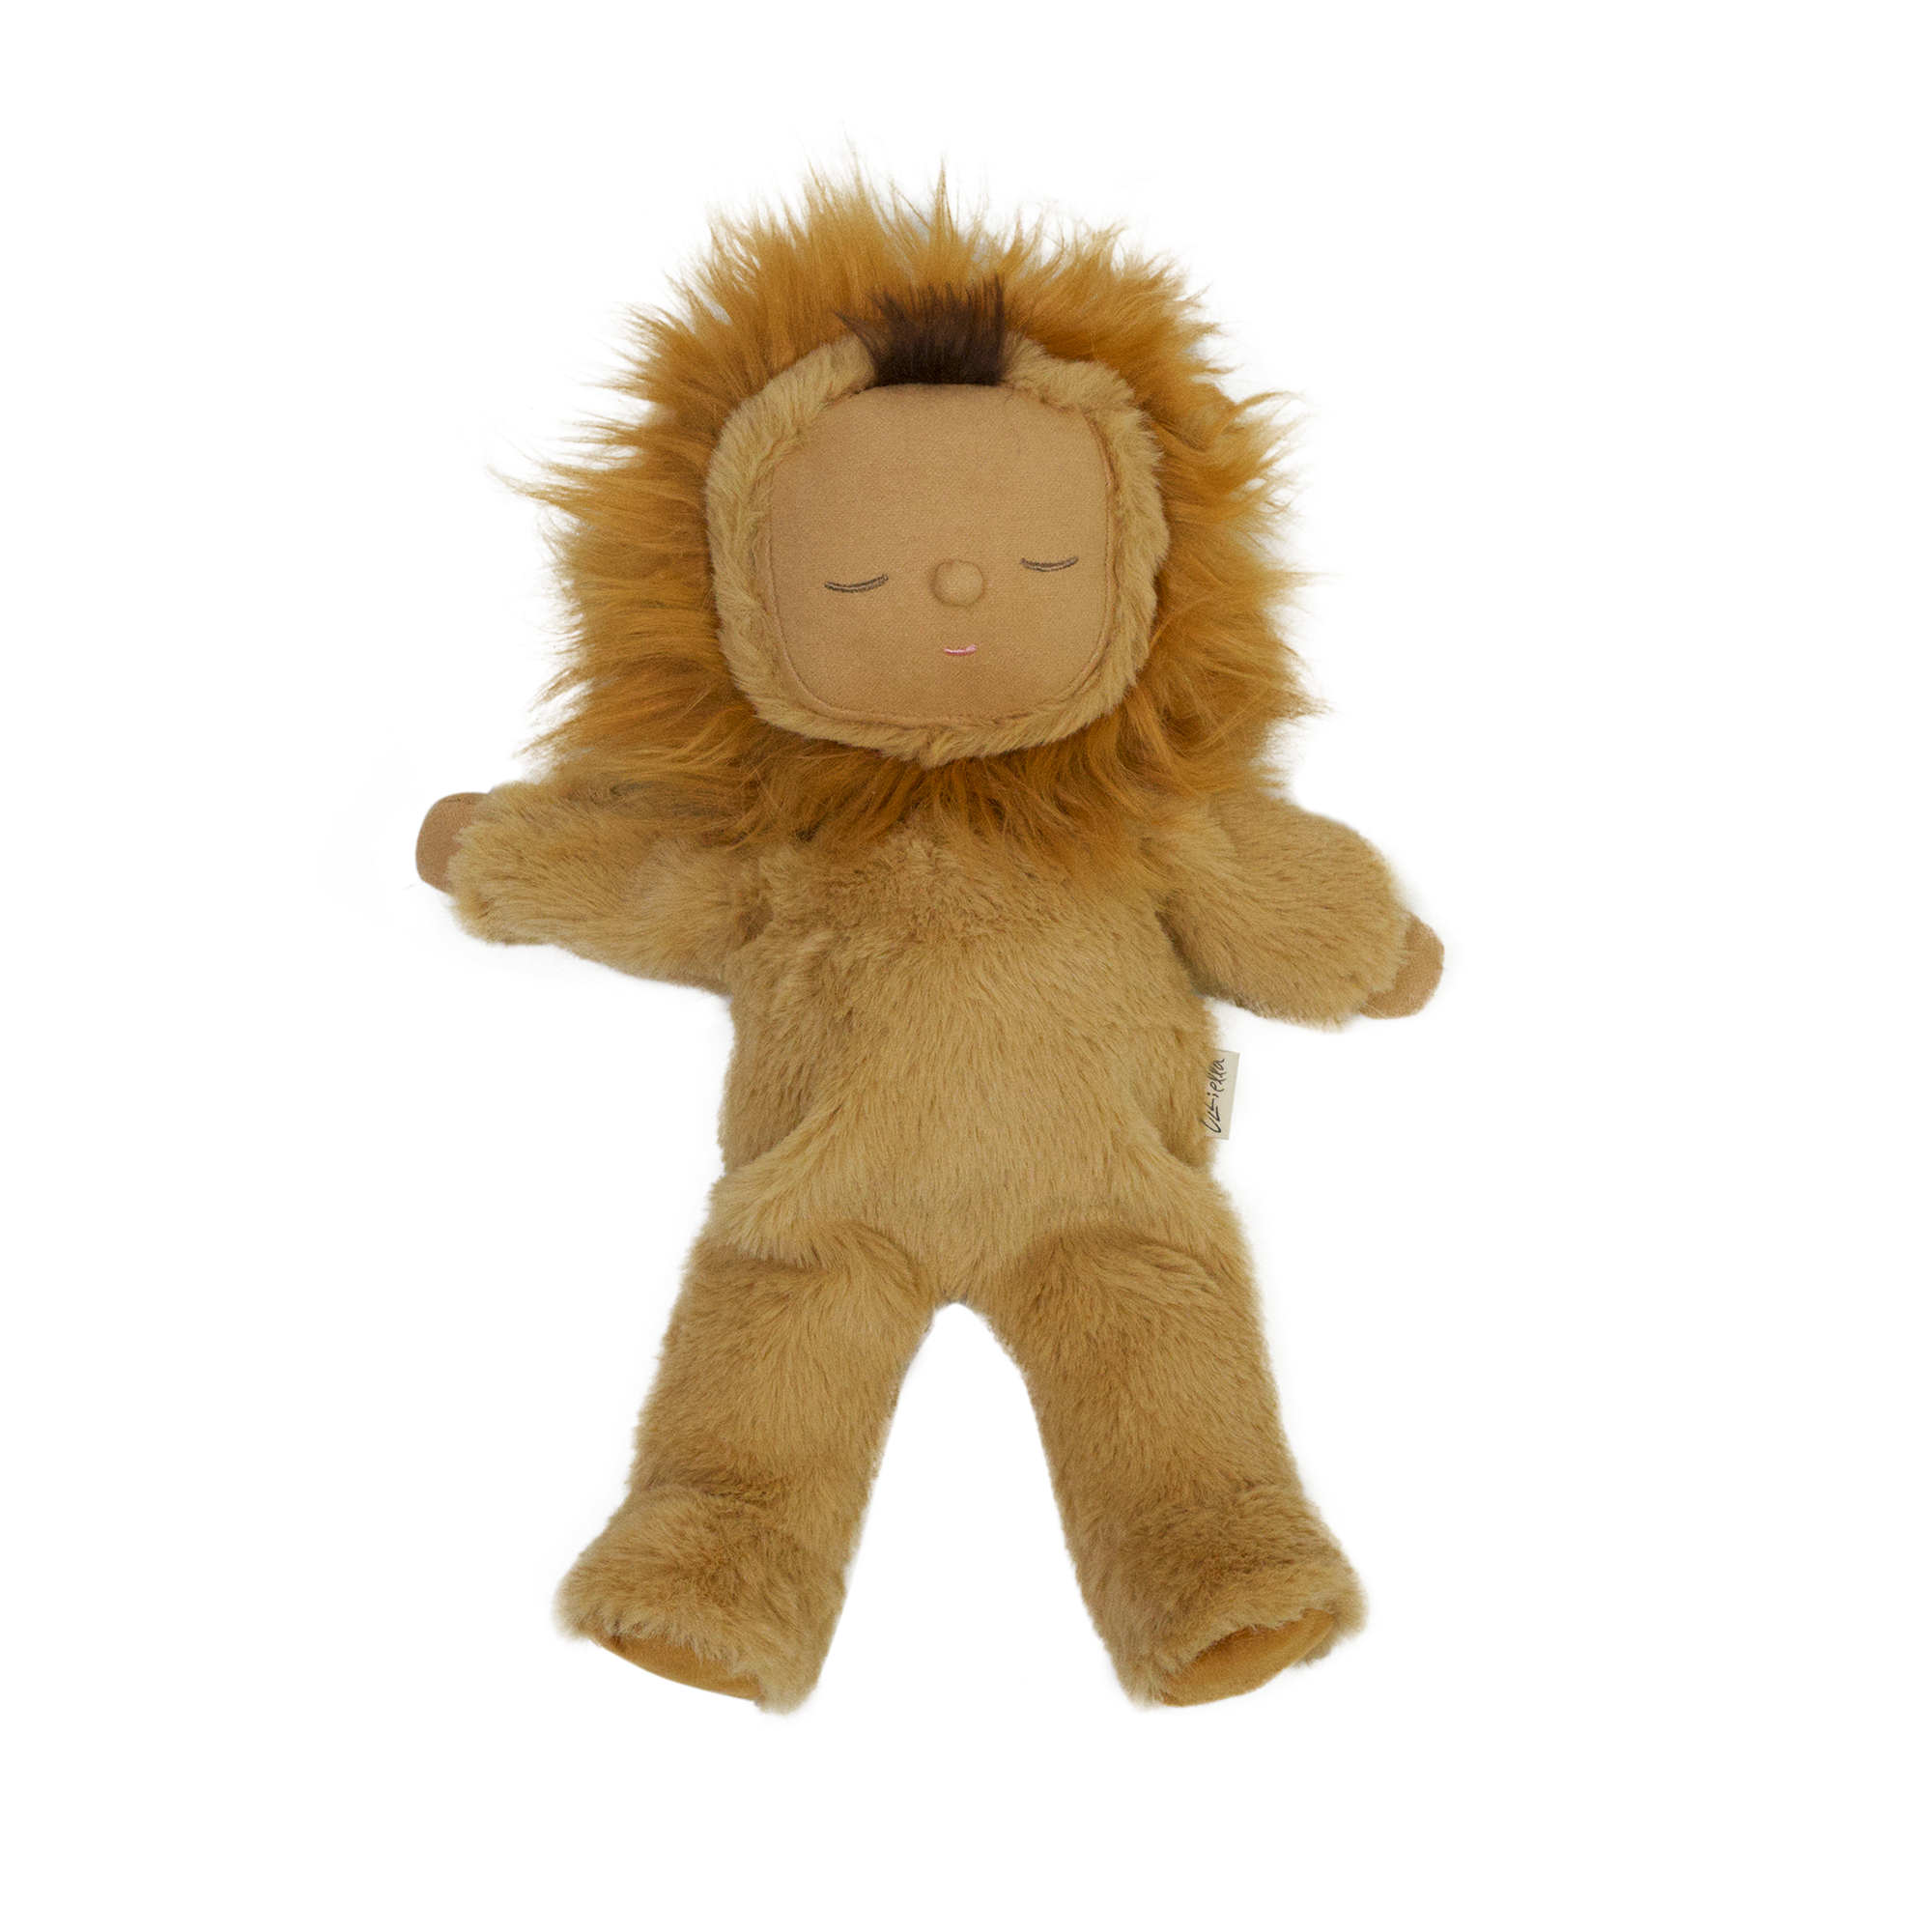 A cozy dinkums lion pip lying on a white background. (Brand: Olli Ella)